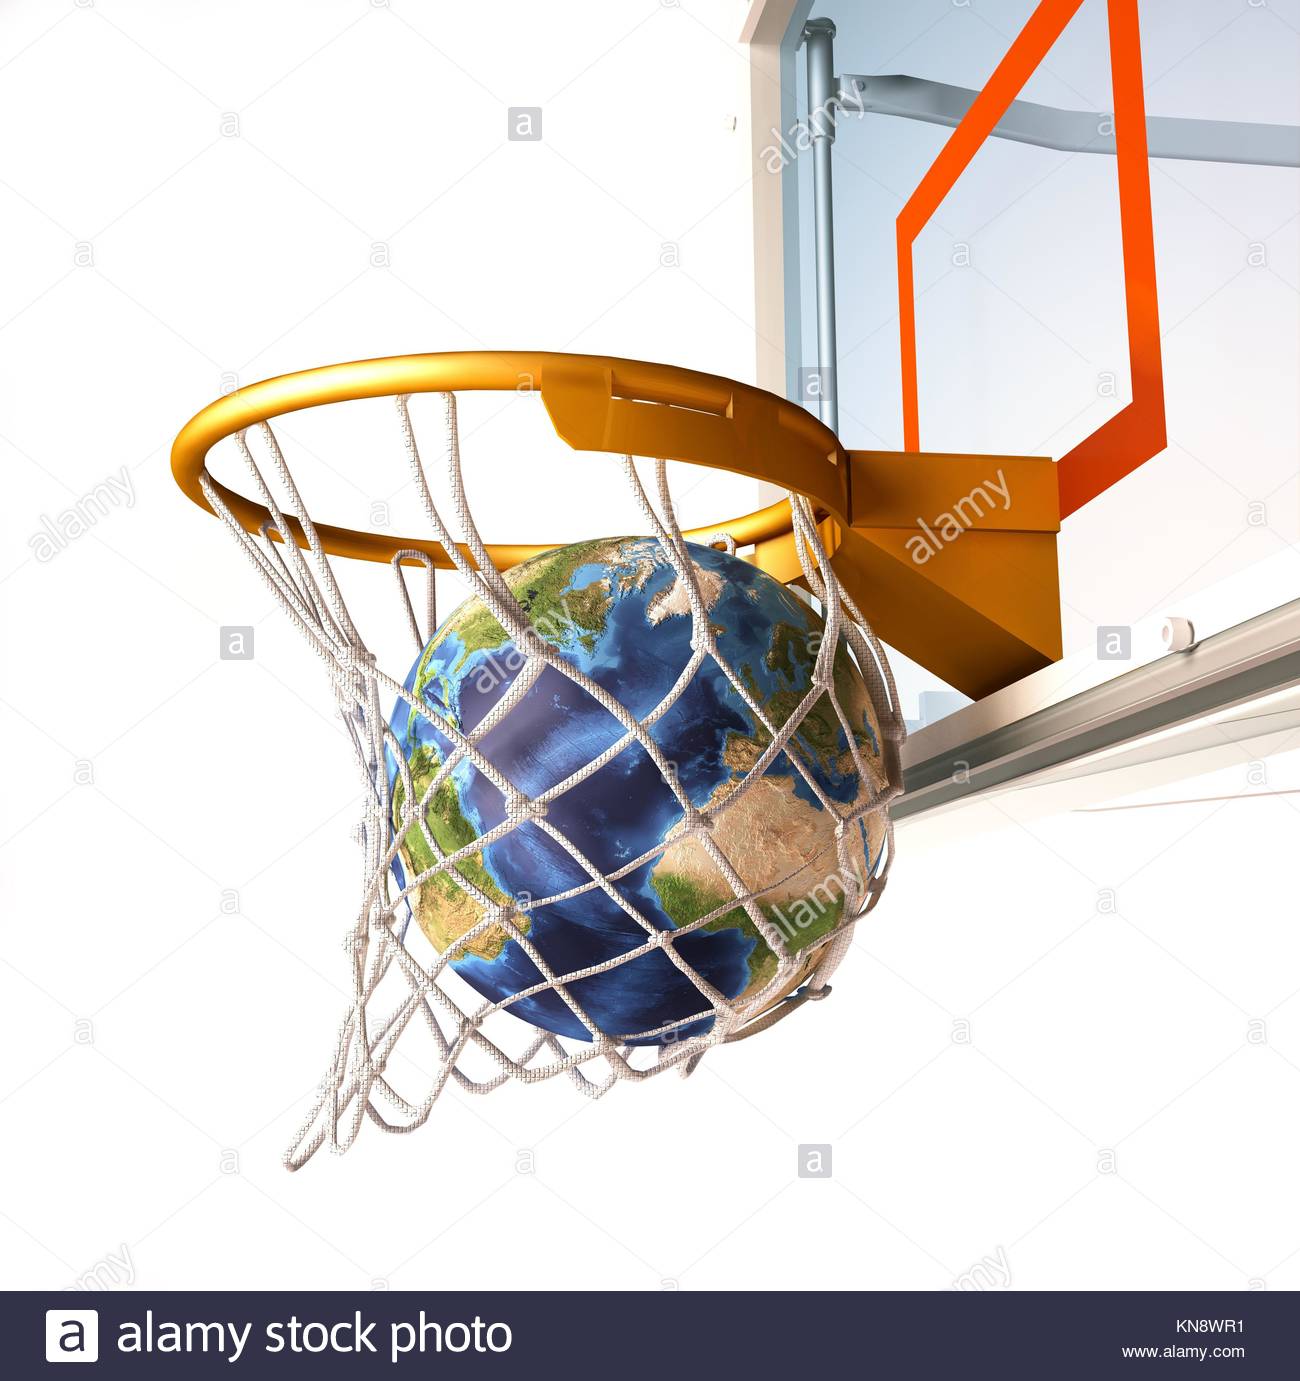 https://c8.alamy.com/comp/KN8WR1/planet-earth-falling-into-the-basketball-basket-by-a-perfect-shot-KN8WR1.jpg